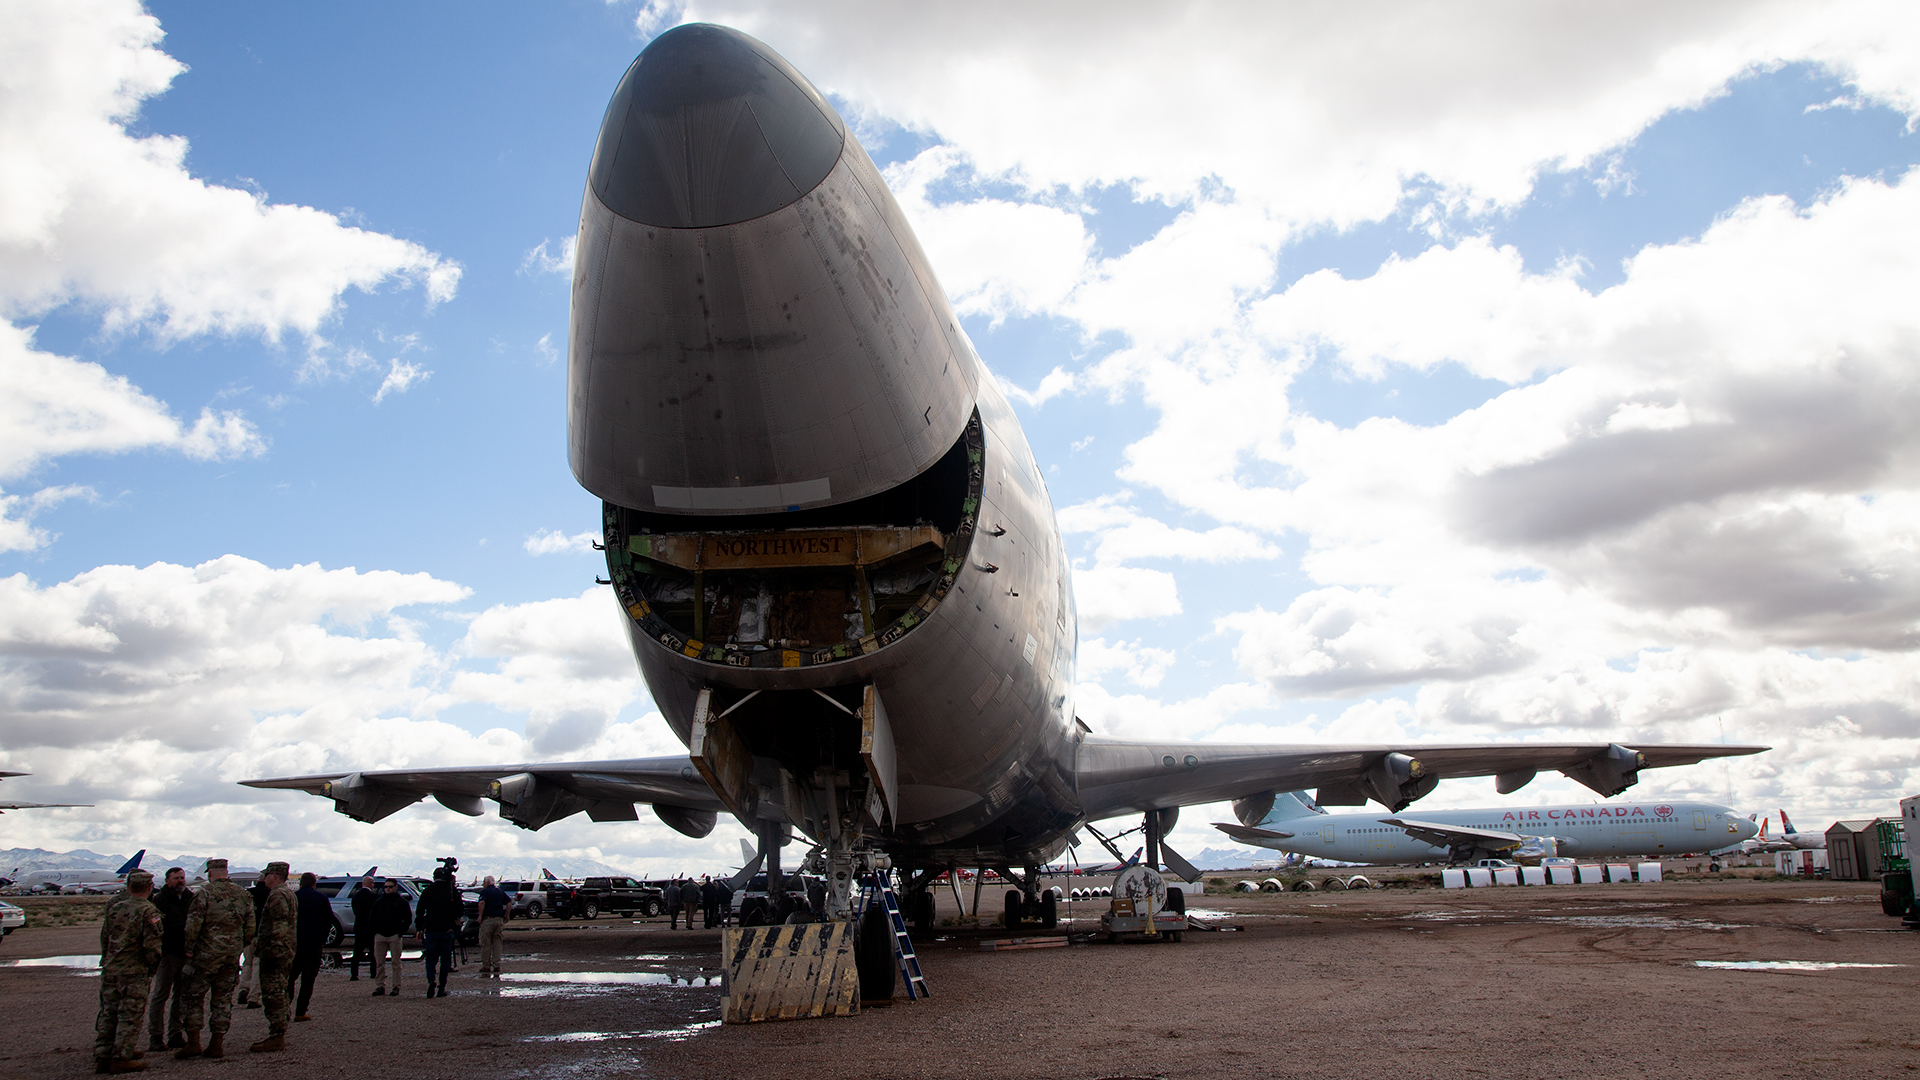 A group of military members gather under a decommissioned aircraft